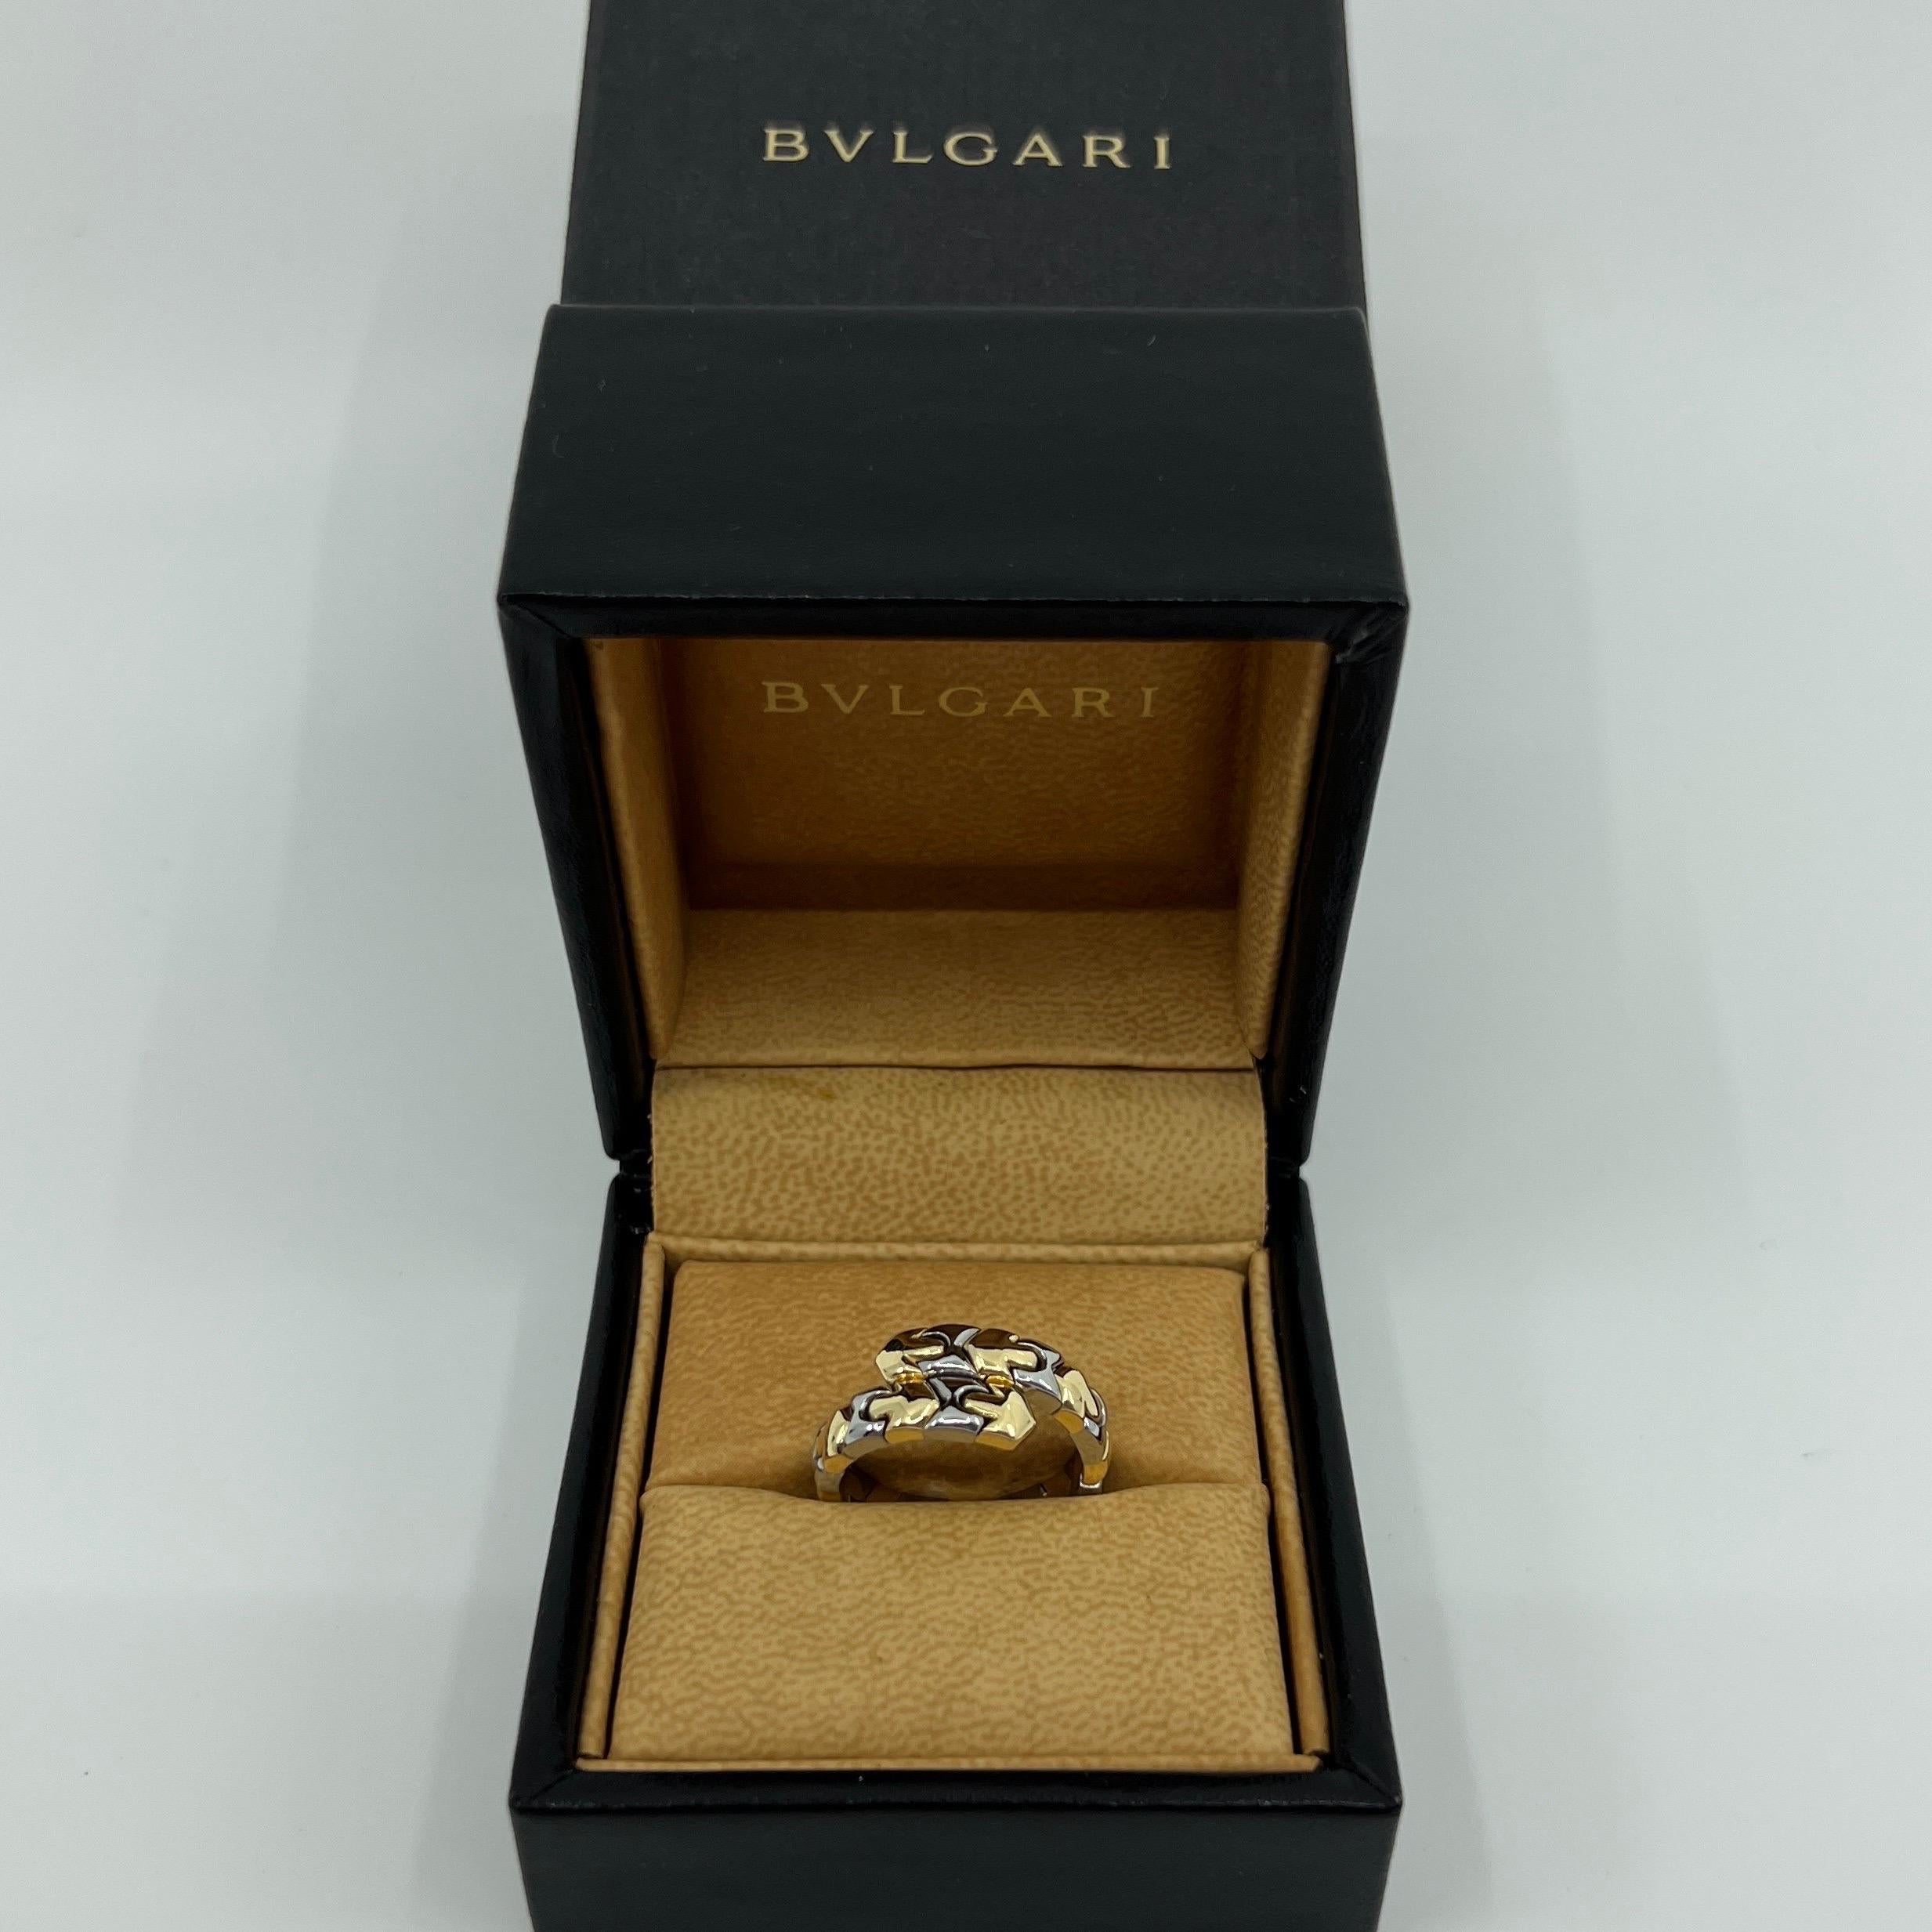 Very Rare Vintage Bvlgari Alveare 18k White & Yellow Gold Spring Snake Ring.

A beautiful vintage mixed metal gold Bvlgari Alveare ring with flexible spring design.

This stylish and unique spring design allowing it to fit between UK O-P1/2 and US